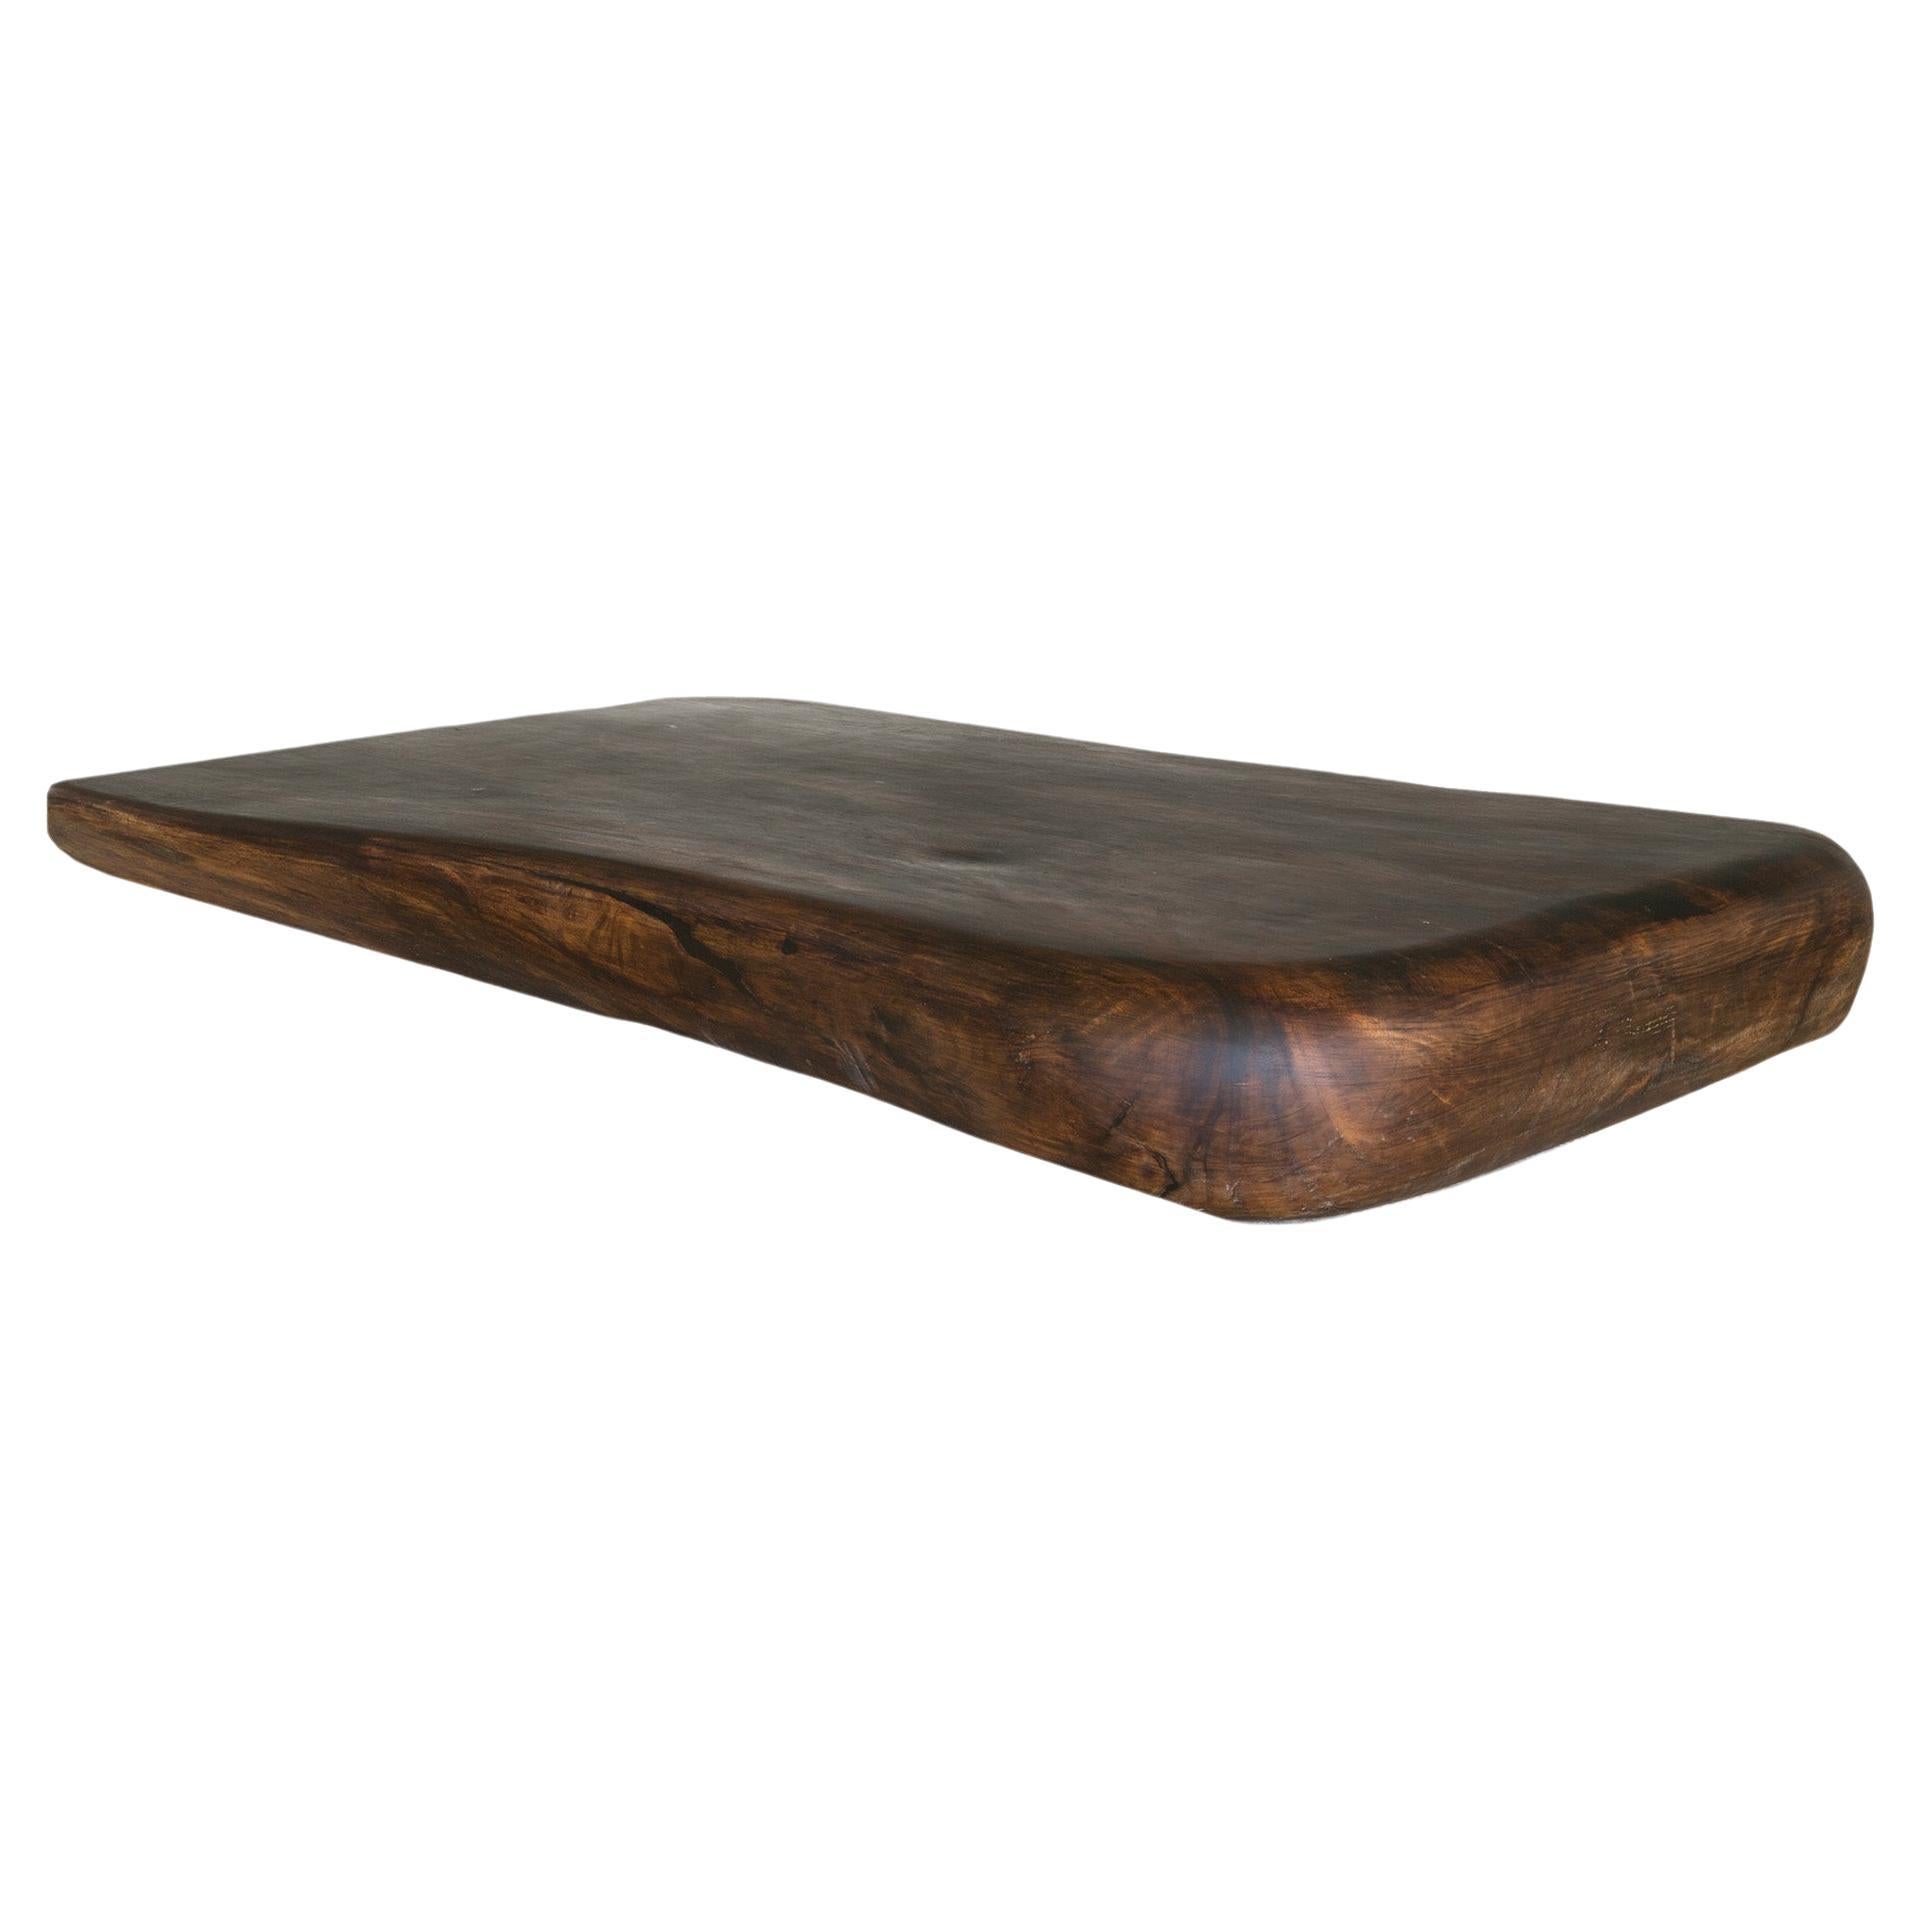 Freeform Wood Coffee Table by CEU Studio, Represented by Tuleste Factory For Sale